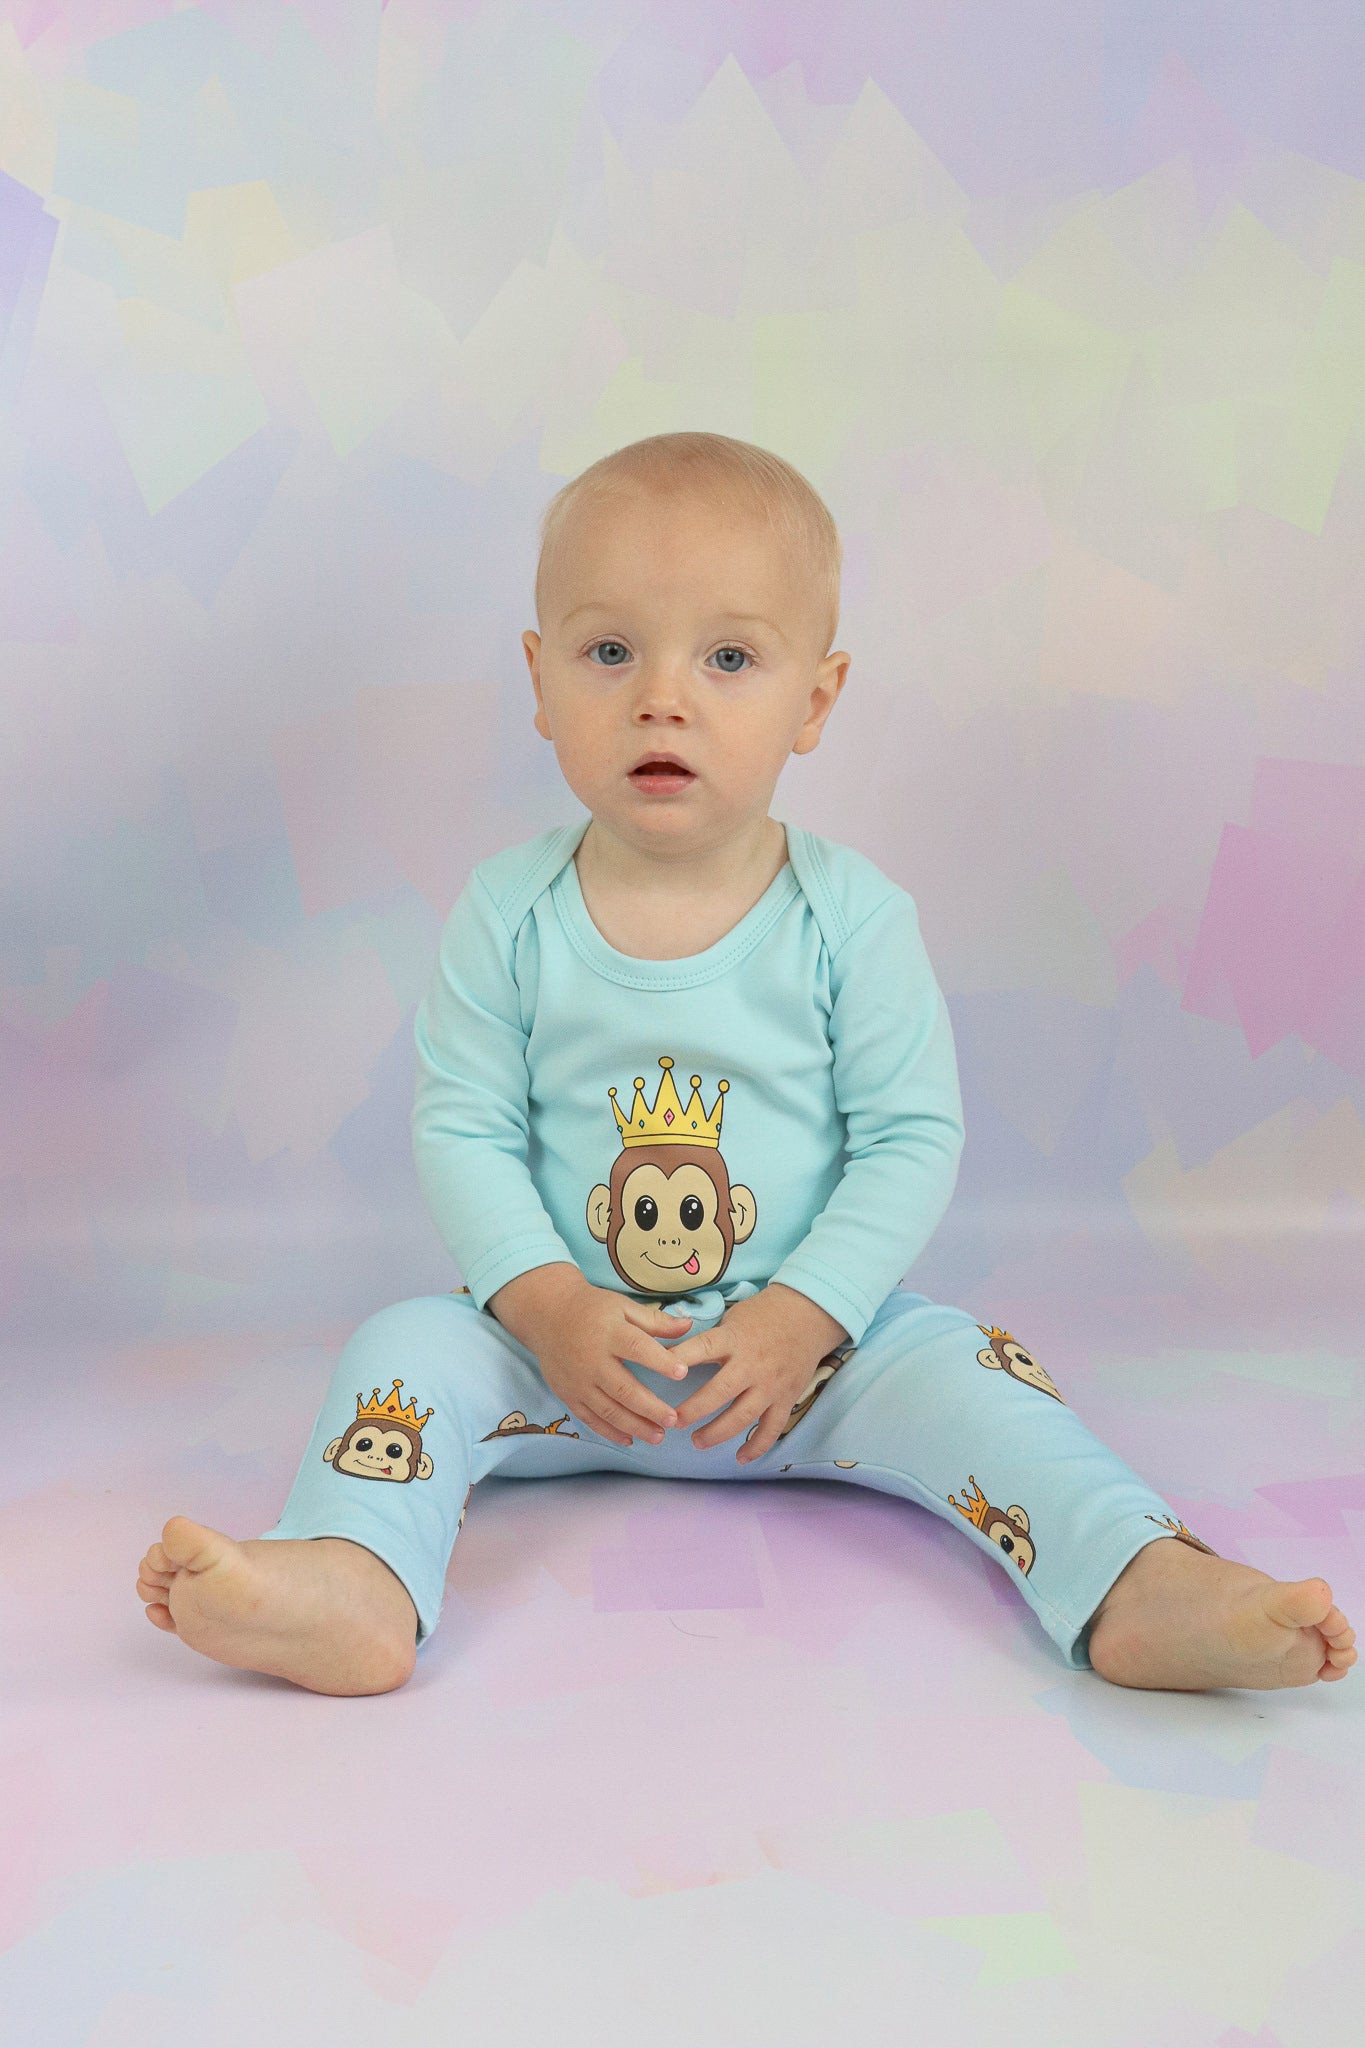 Baby boy sitting down wearing a pastel blue long sleeve romper with a cute monkey design on it. Also wearing pants with the cute monkey design all over